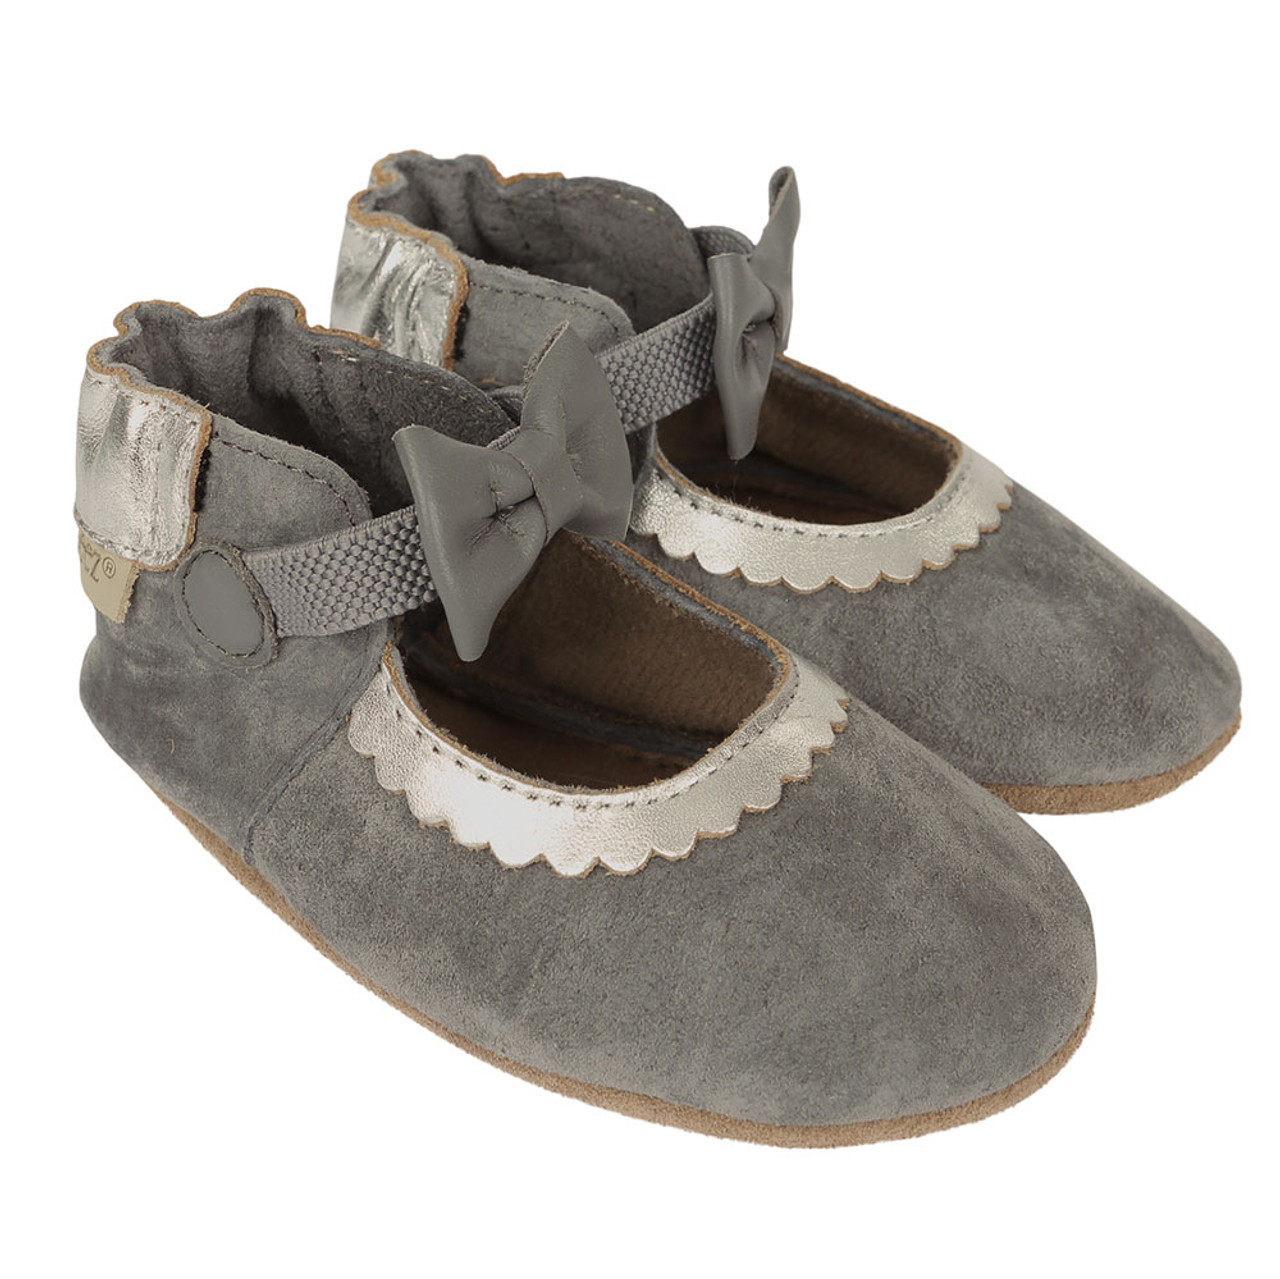 soft sole mary janes